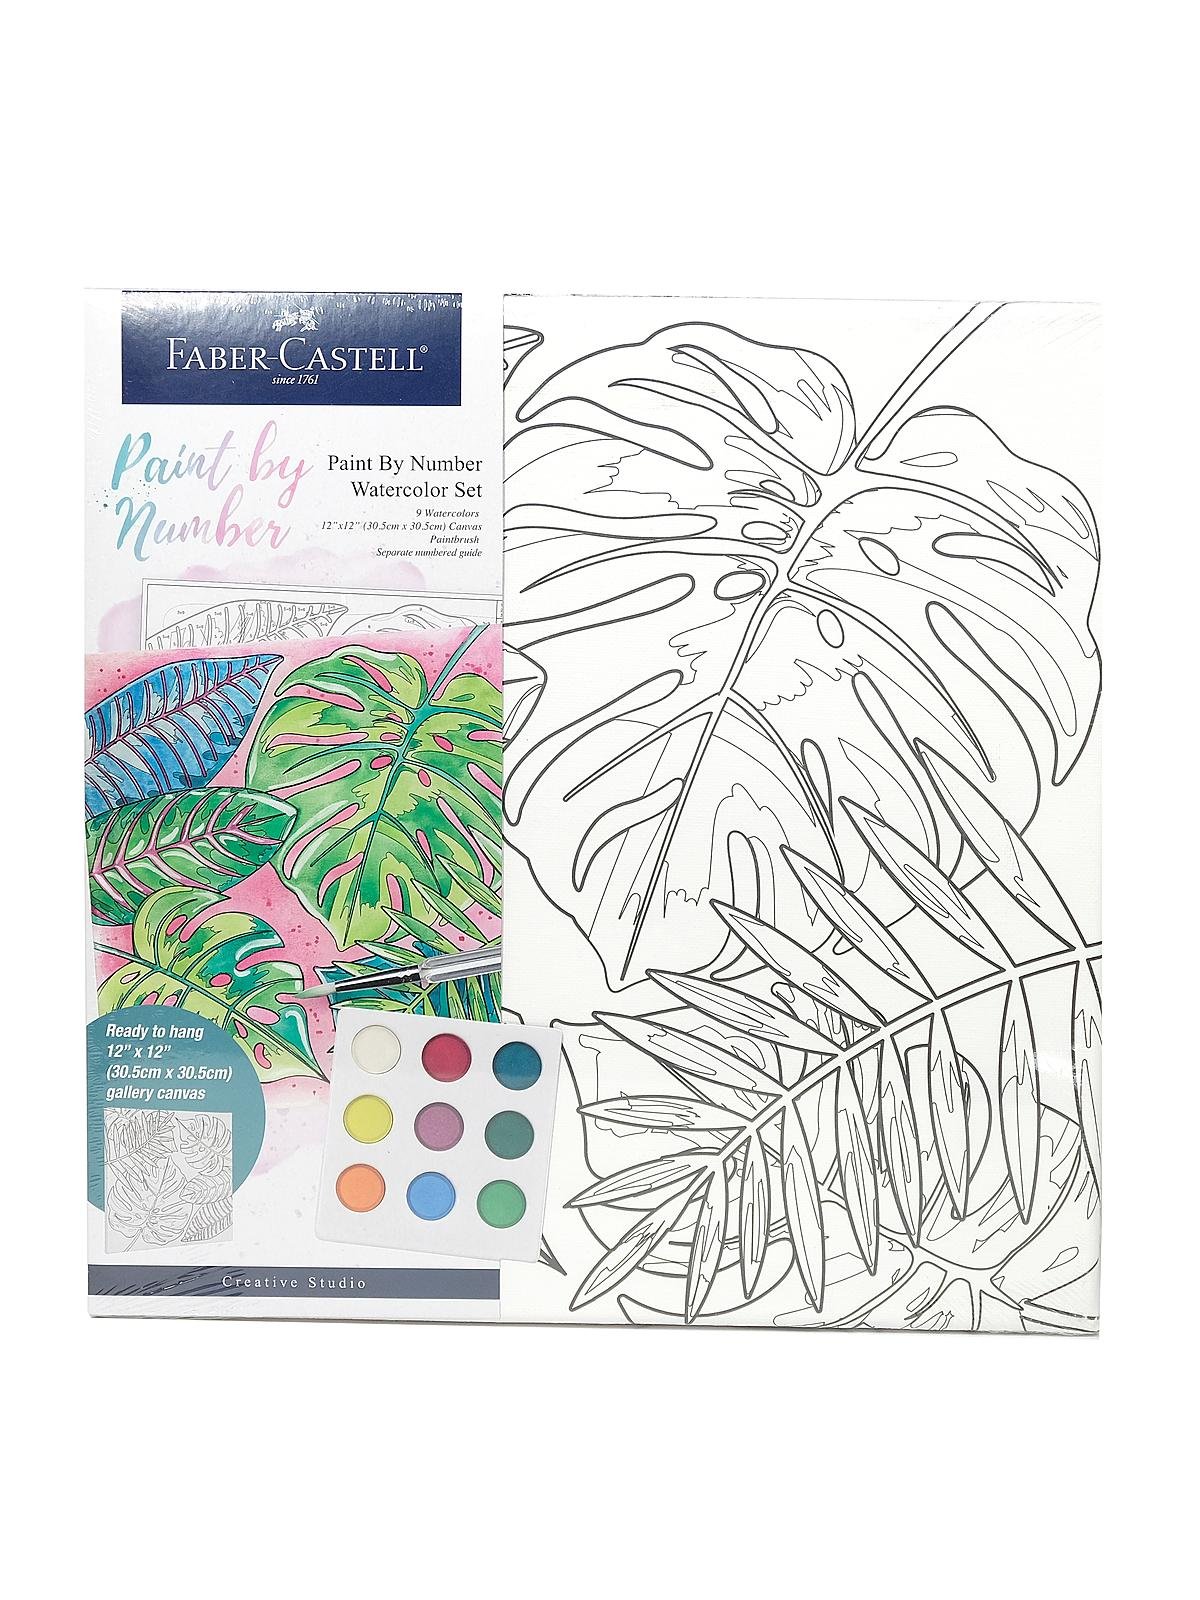 Faber-Castell Paint by Number Watercolor Bold Floral